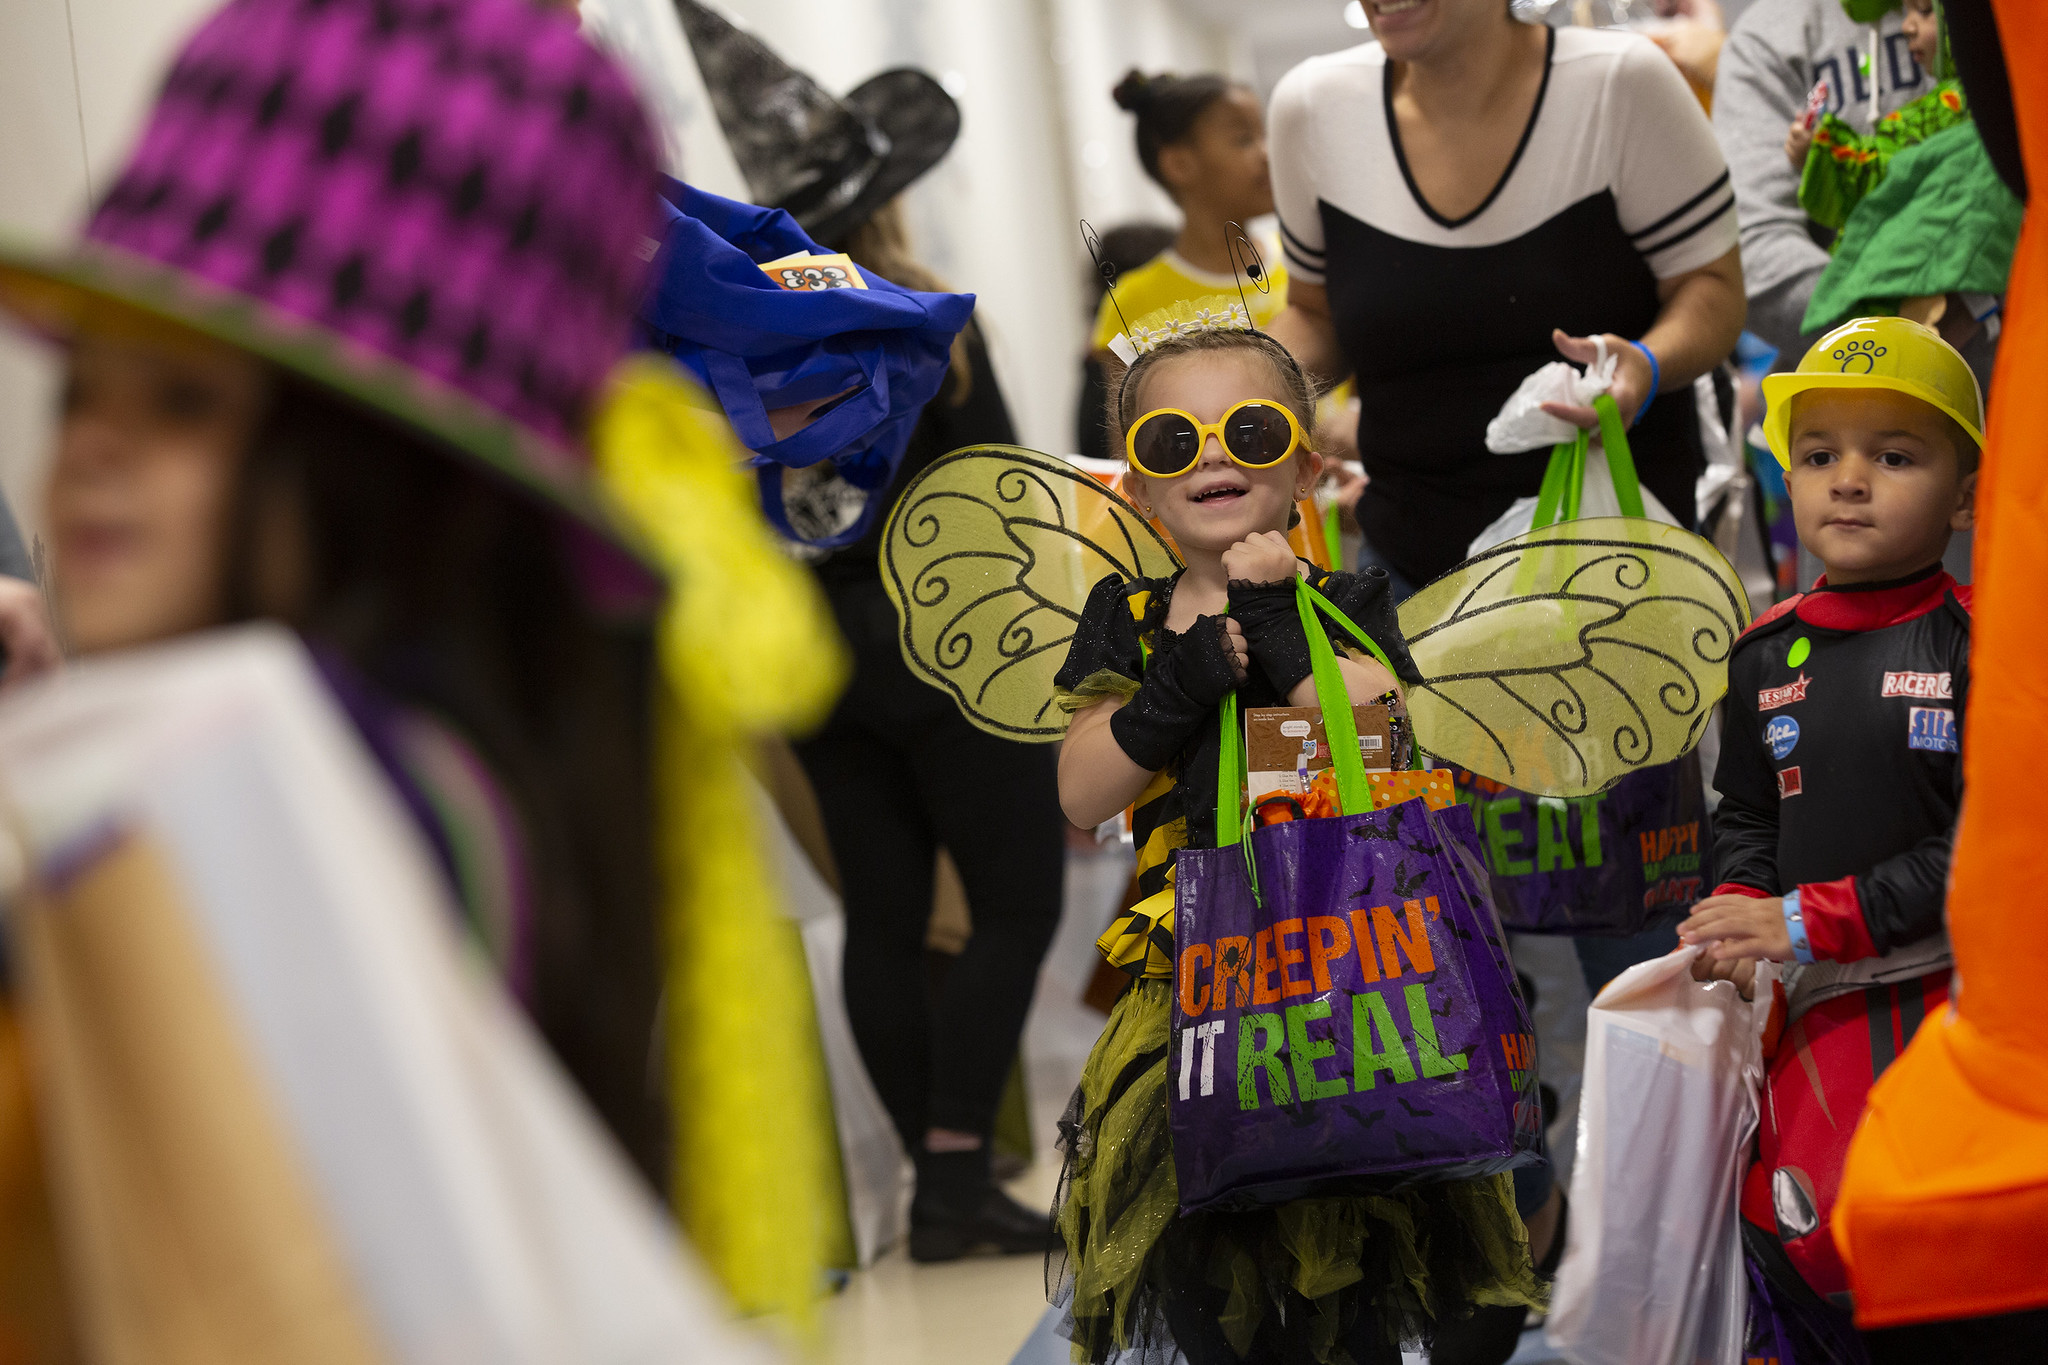 Trinity Stryker hoists a decorative bag. She’s wearing sunglasses, wings and antennae. All around her are other children and adults in costume holding bags.